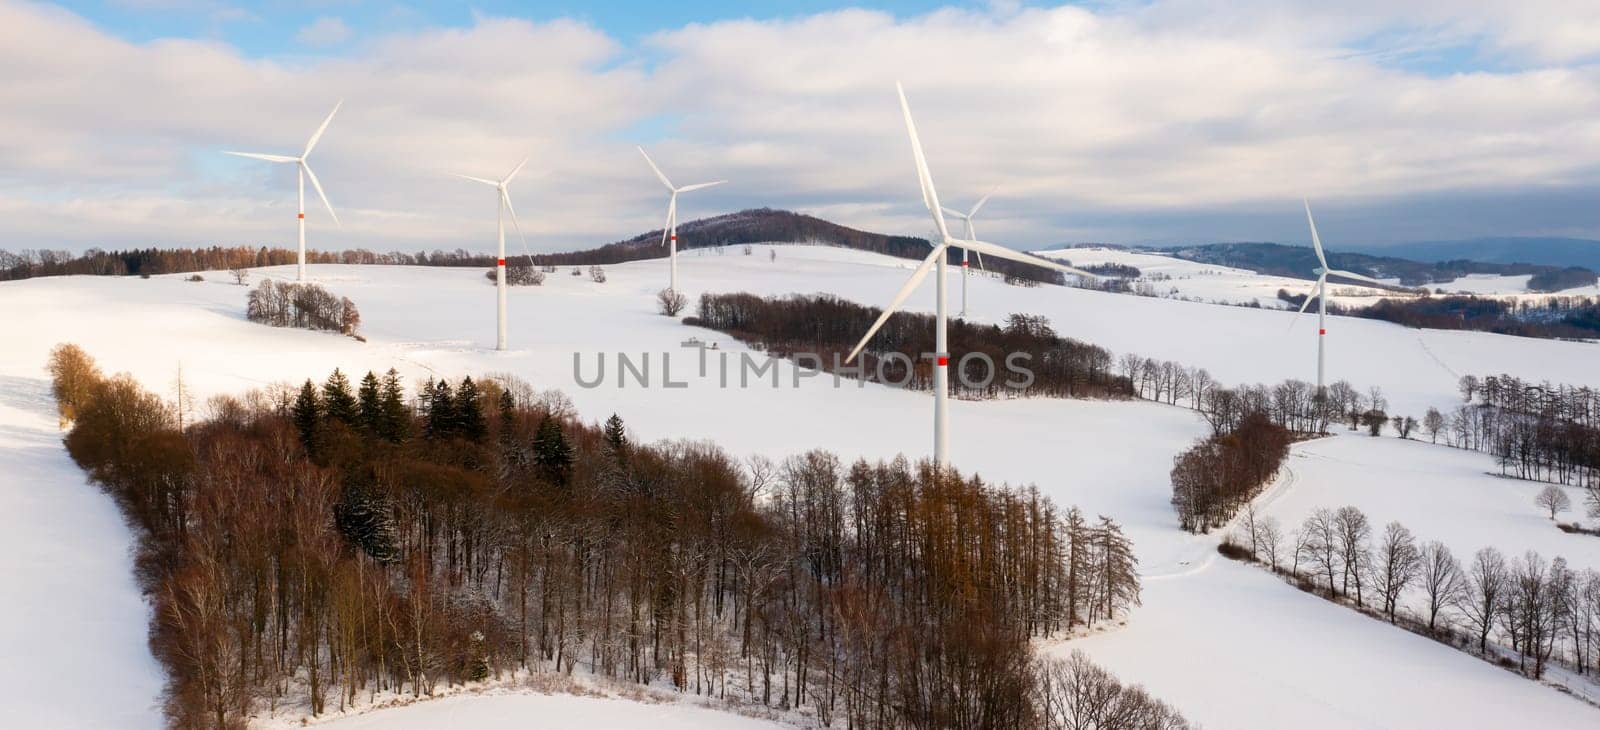 Wind turbine on winter field against cloudy blue sky during sunset. by vladimka